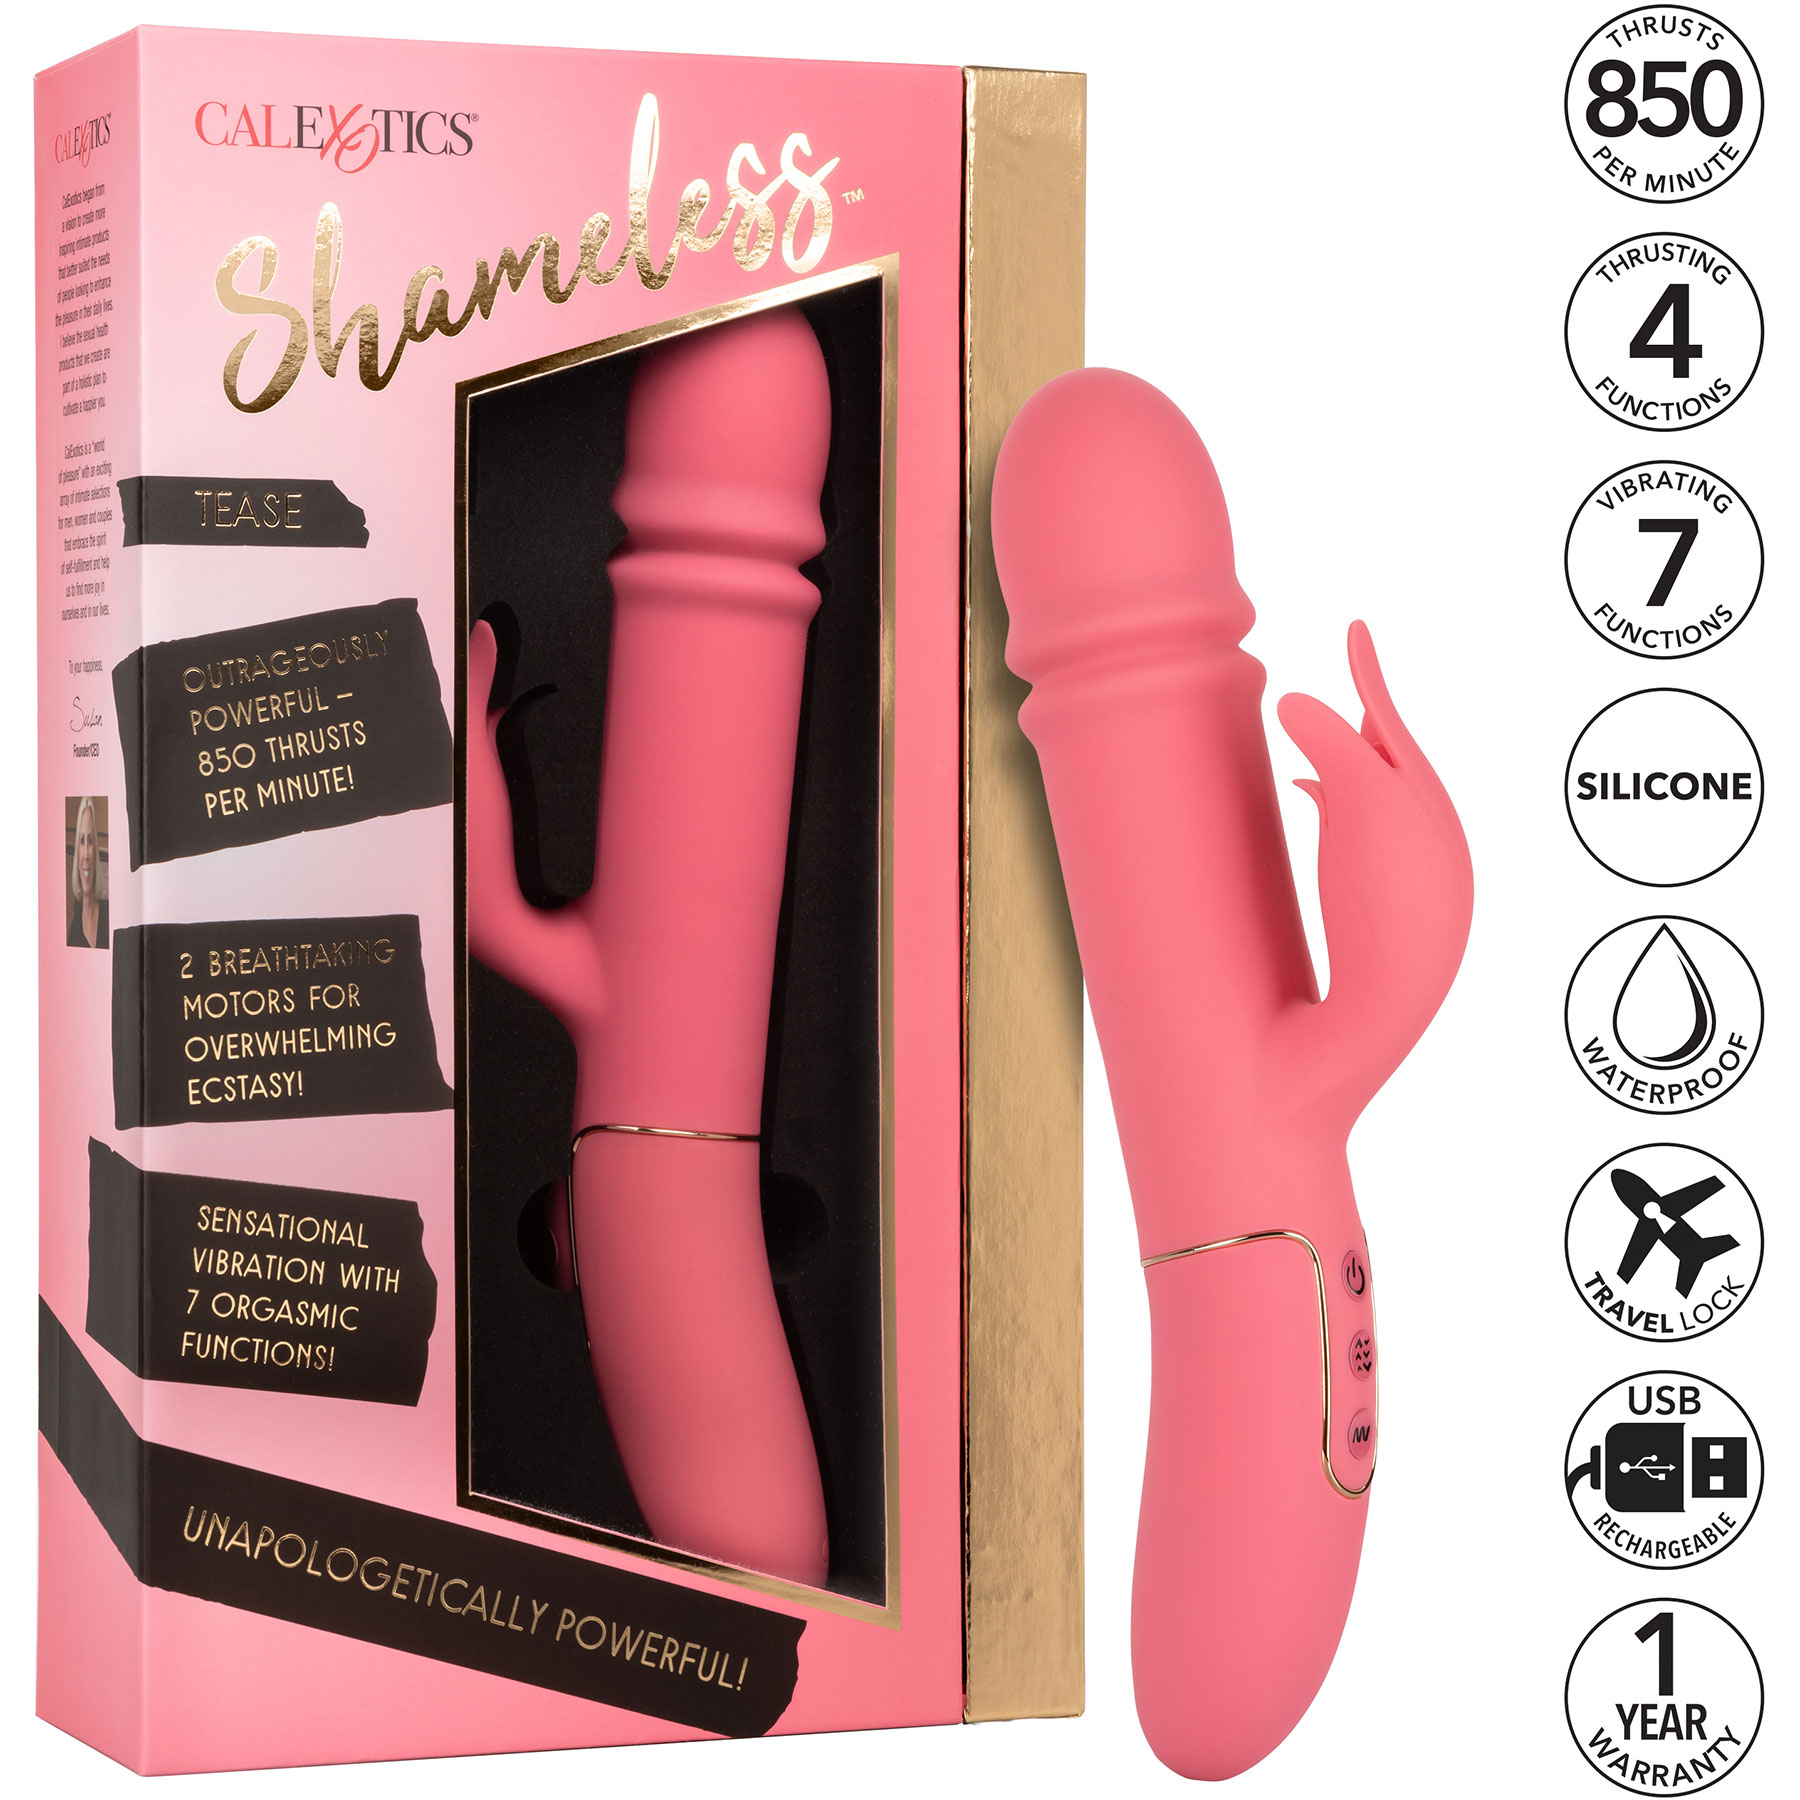 Shameless Tease Powerful Silicone Waterproof Rechargeable Rabbit Style Thrusting Vibrator - Features